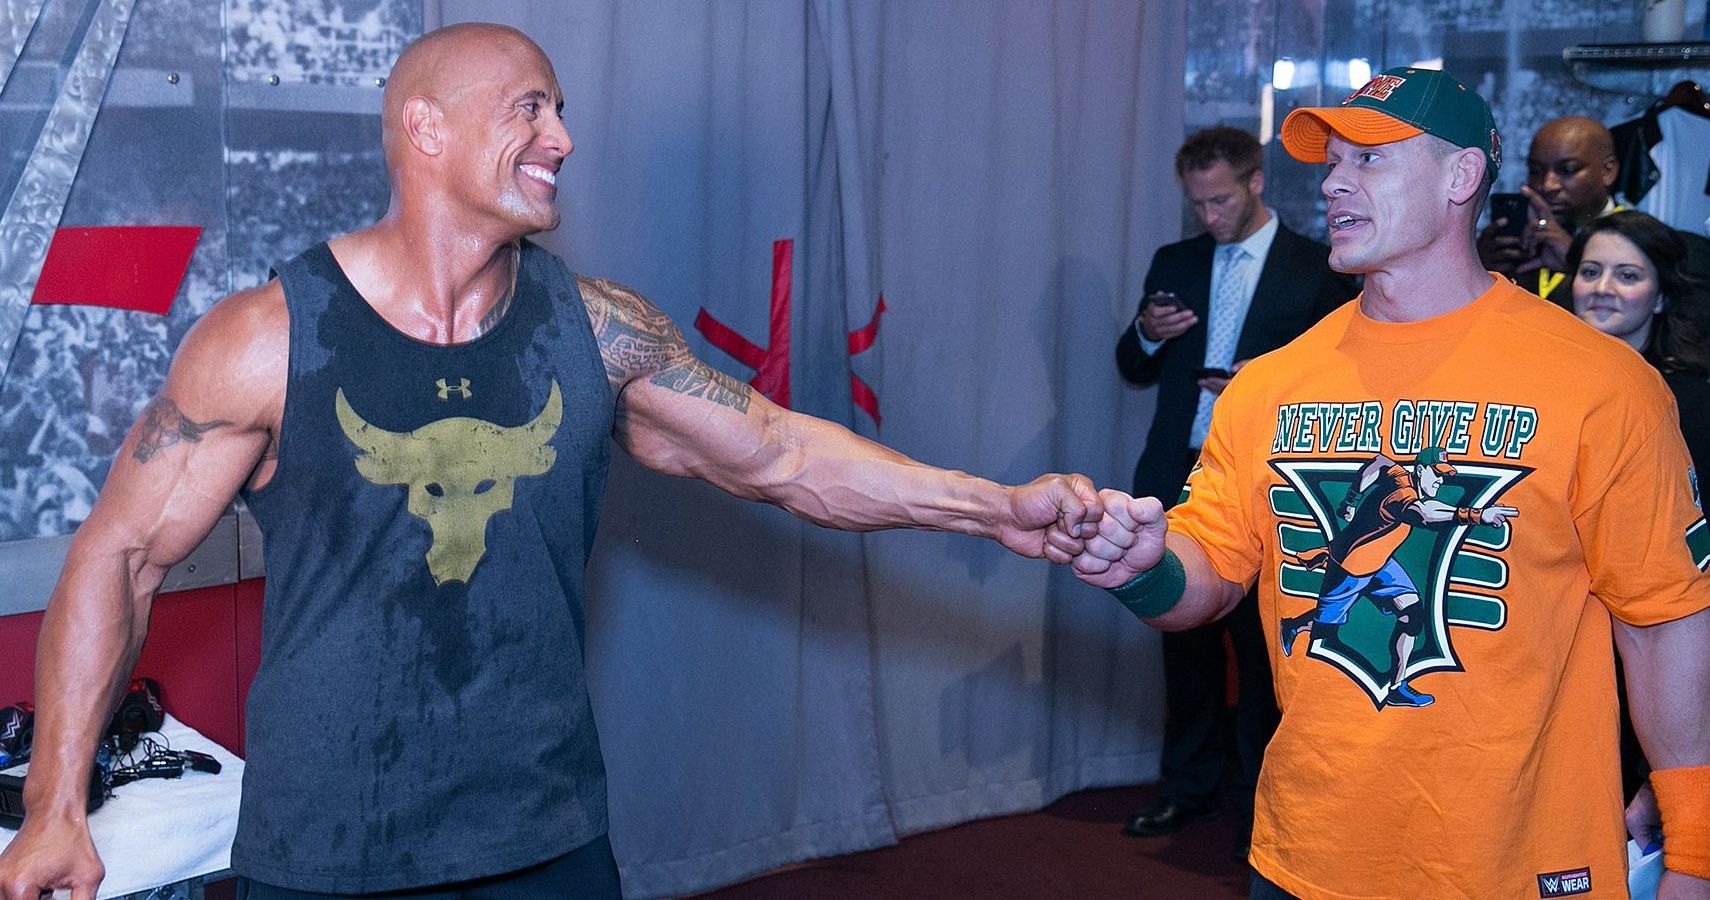 The Rock and John Cena backstage in WWE